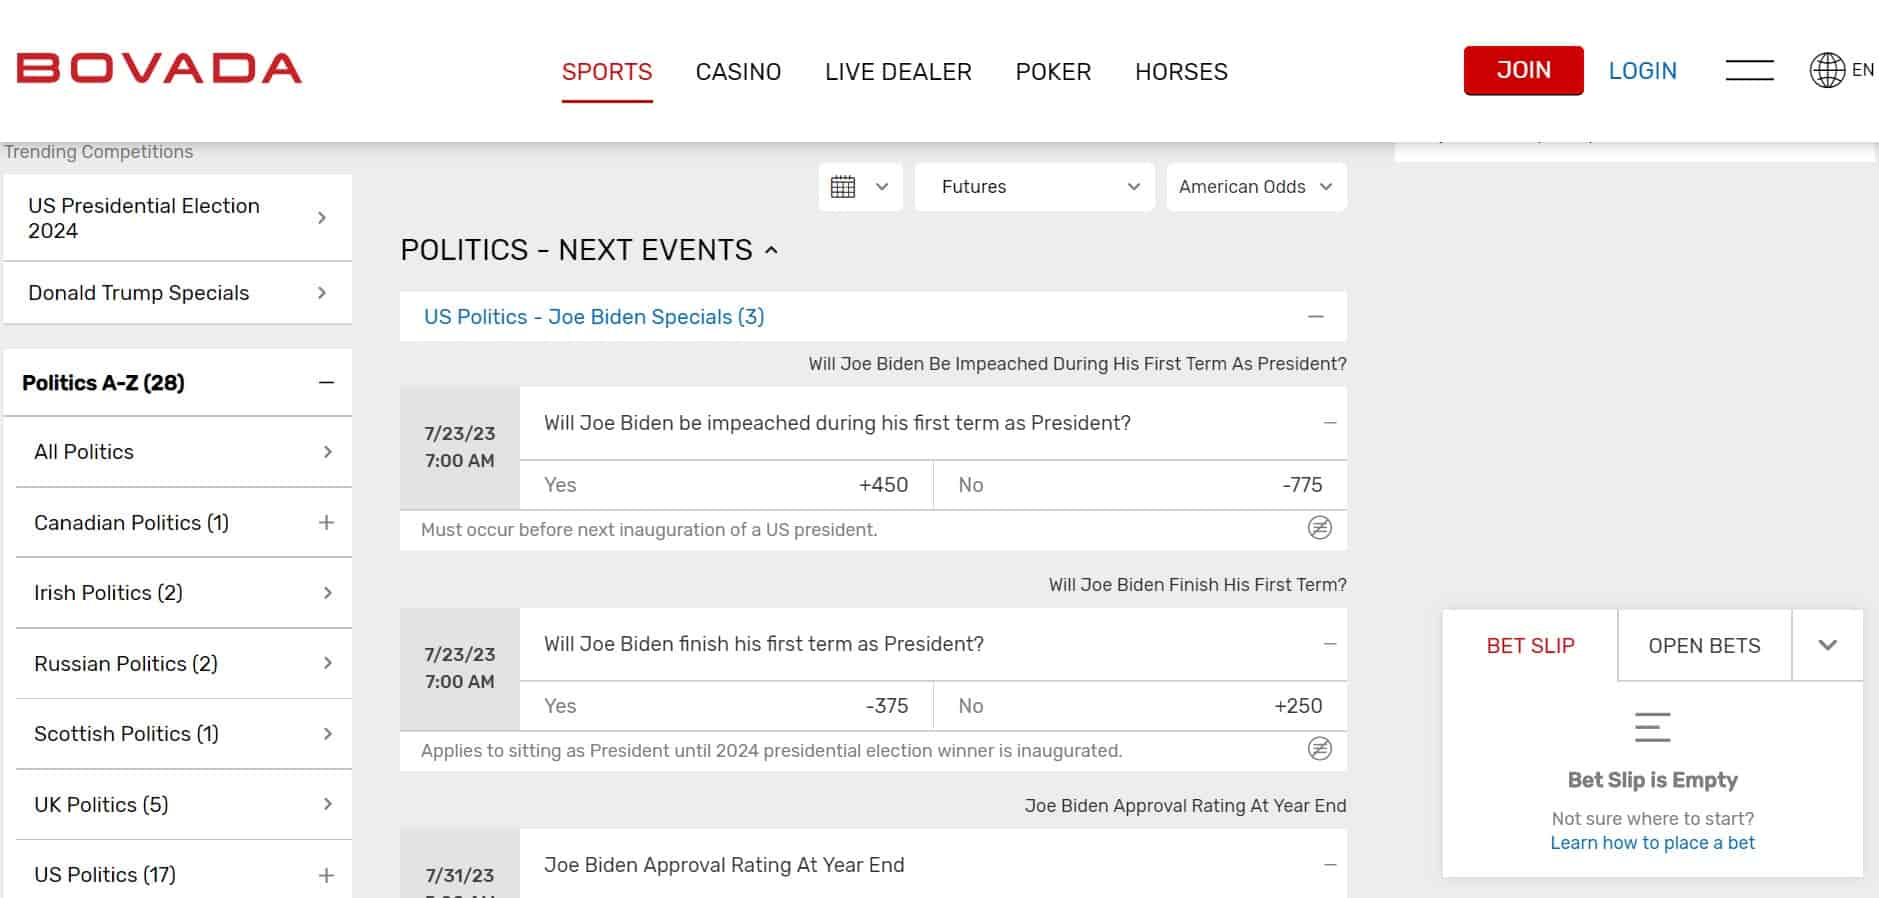 Political Betting Sites - Bovada